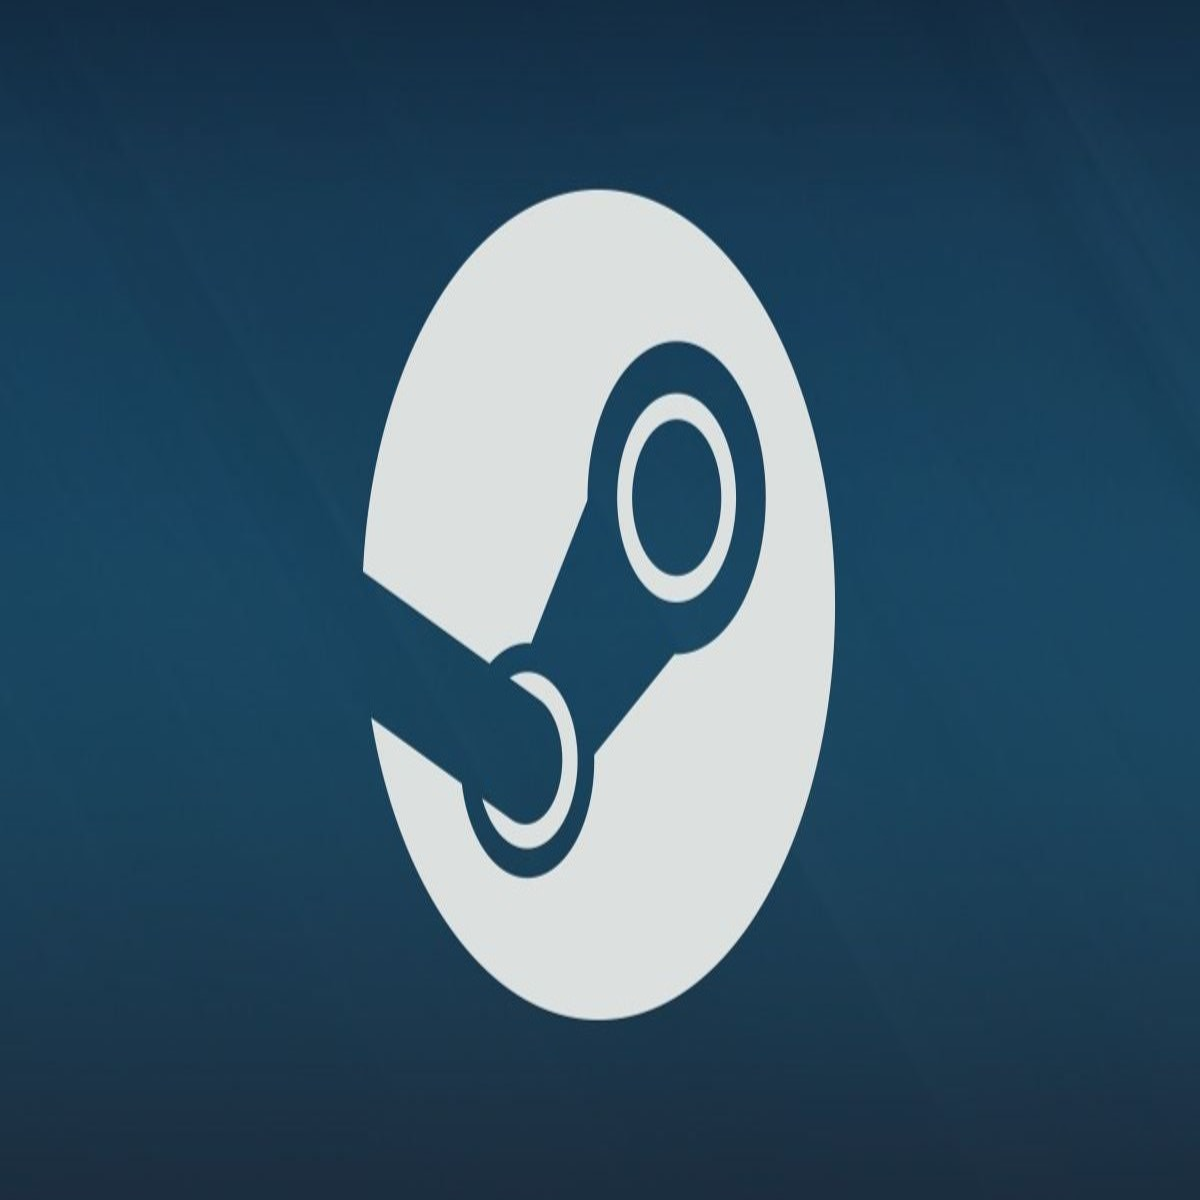 Steam Accounts Hacked